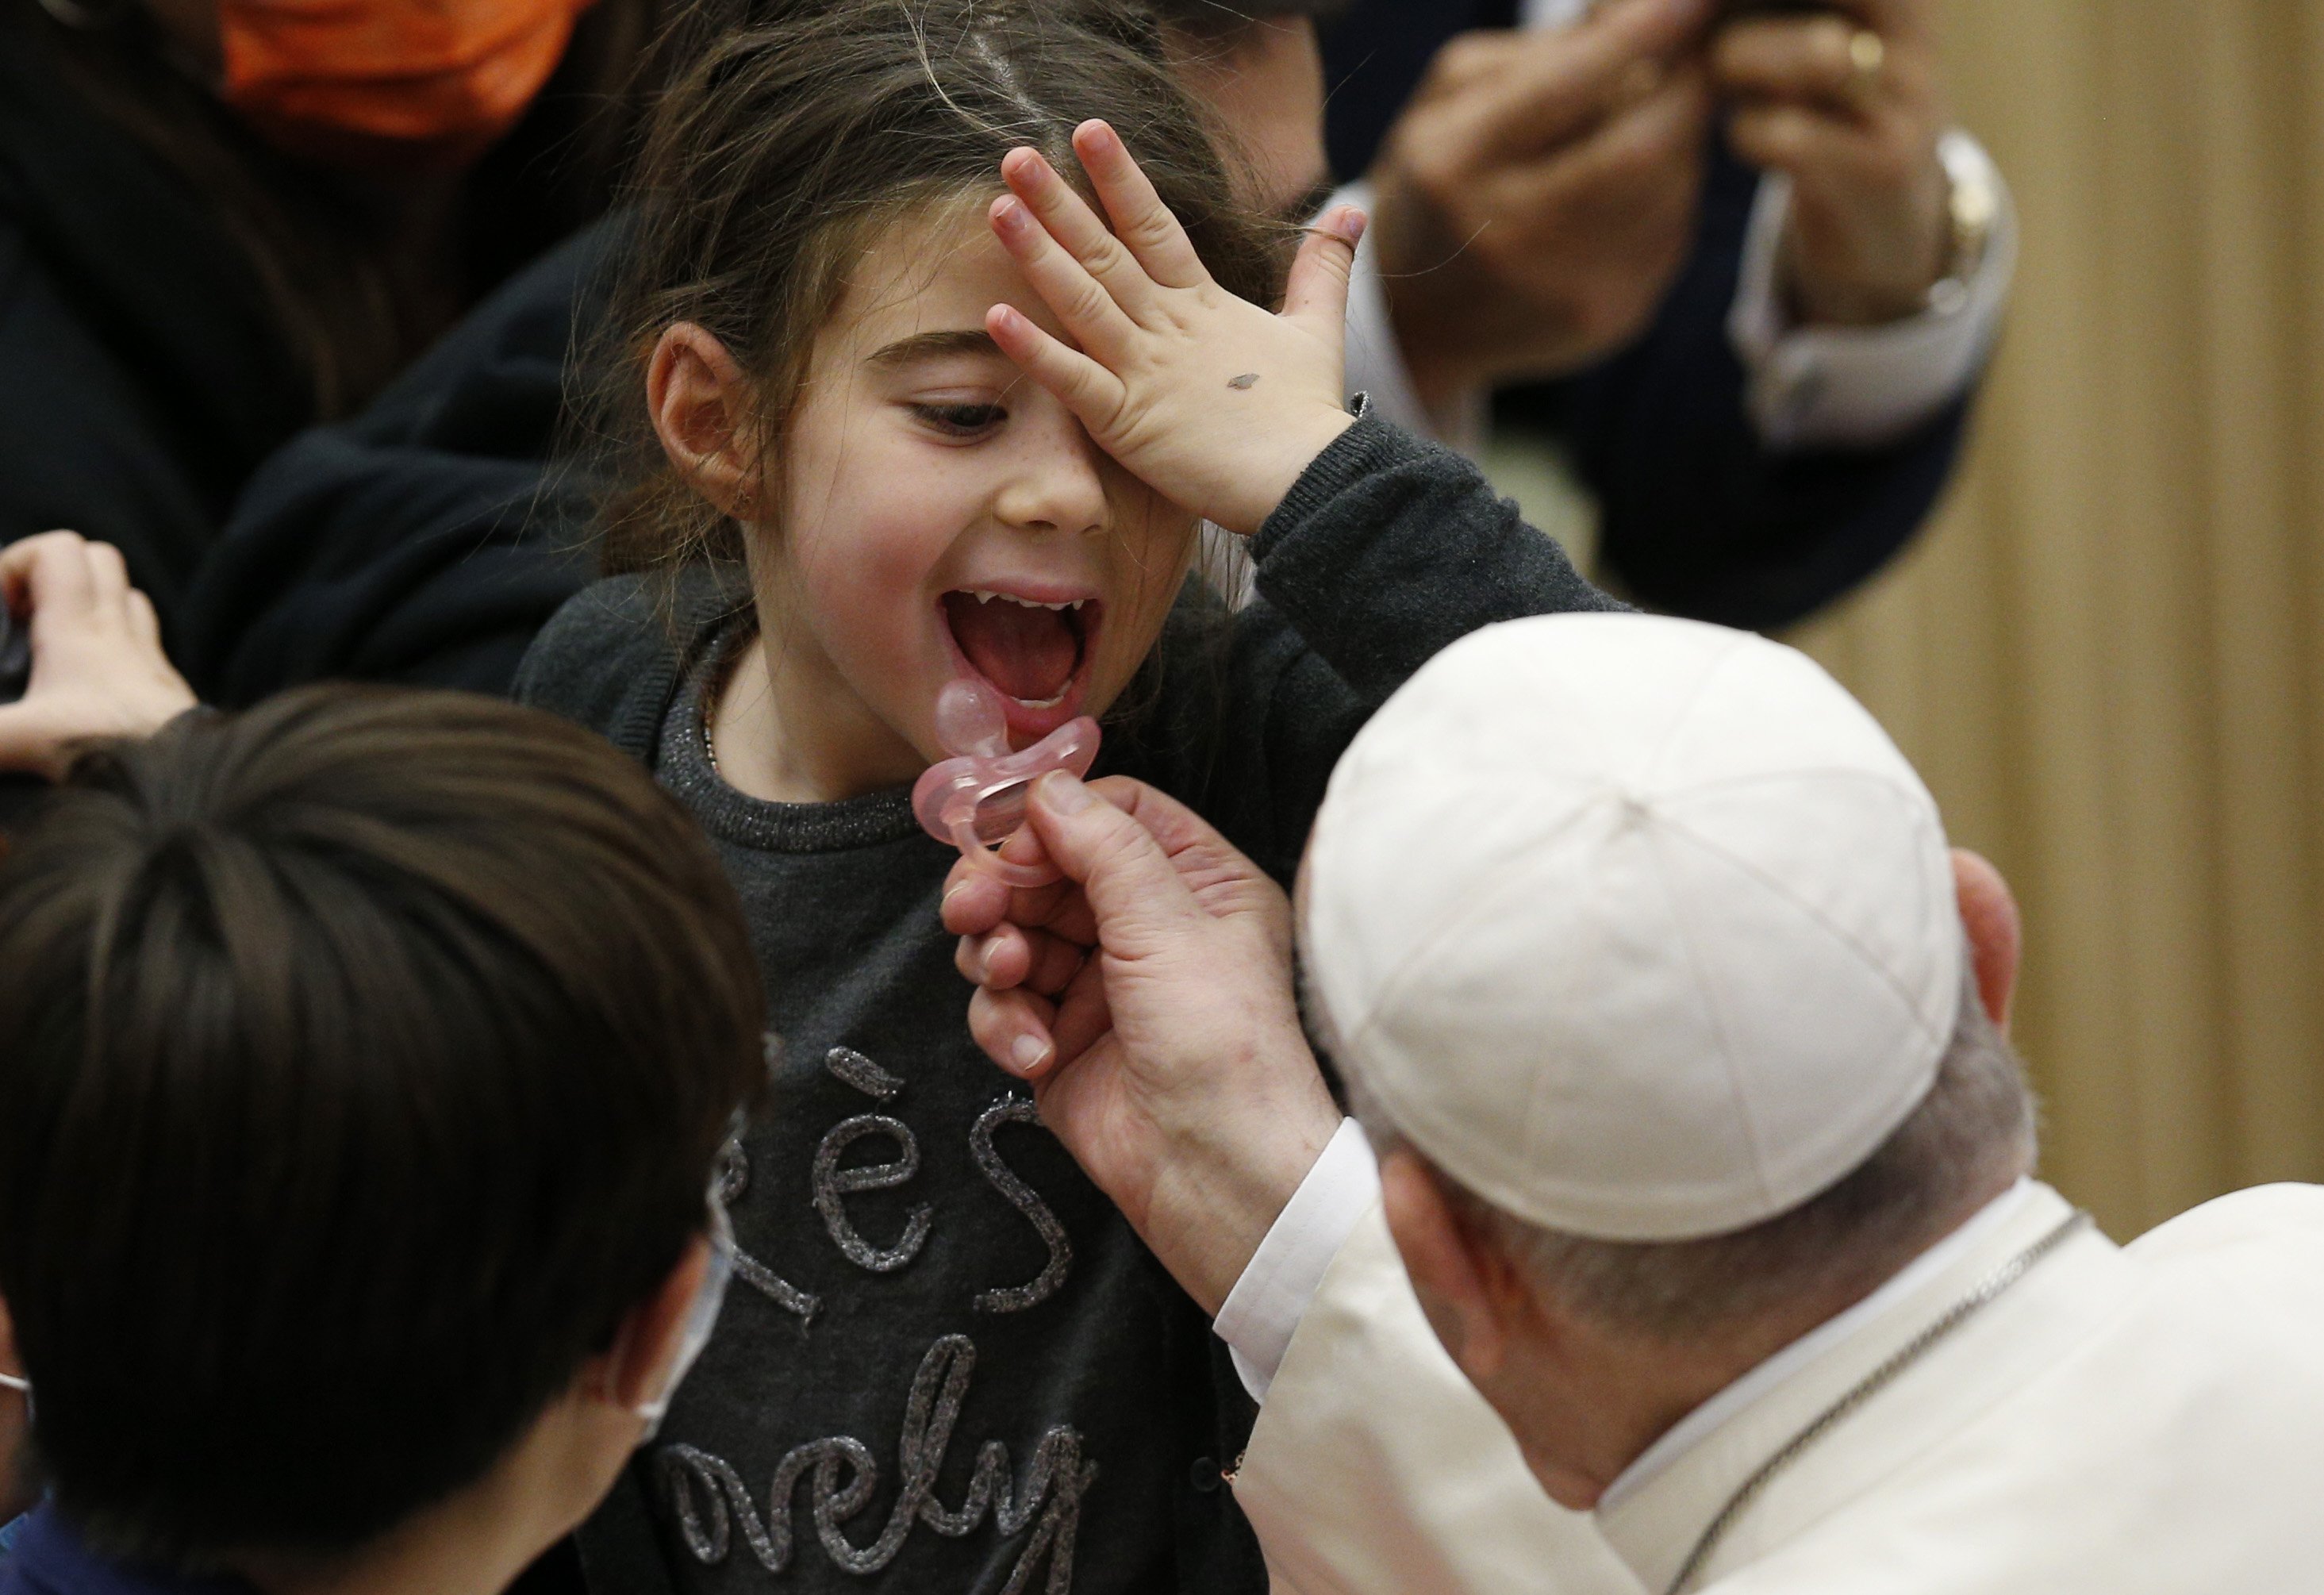 Pope Francis puts a pacifier into a child's mouth during his general audience in the Paul VI hall at the Vatican Nov. 24, 2021. (CNS photo/Paul Haring)